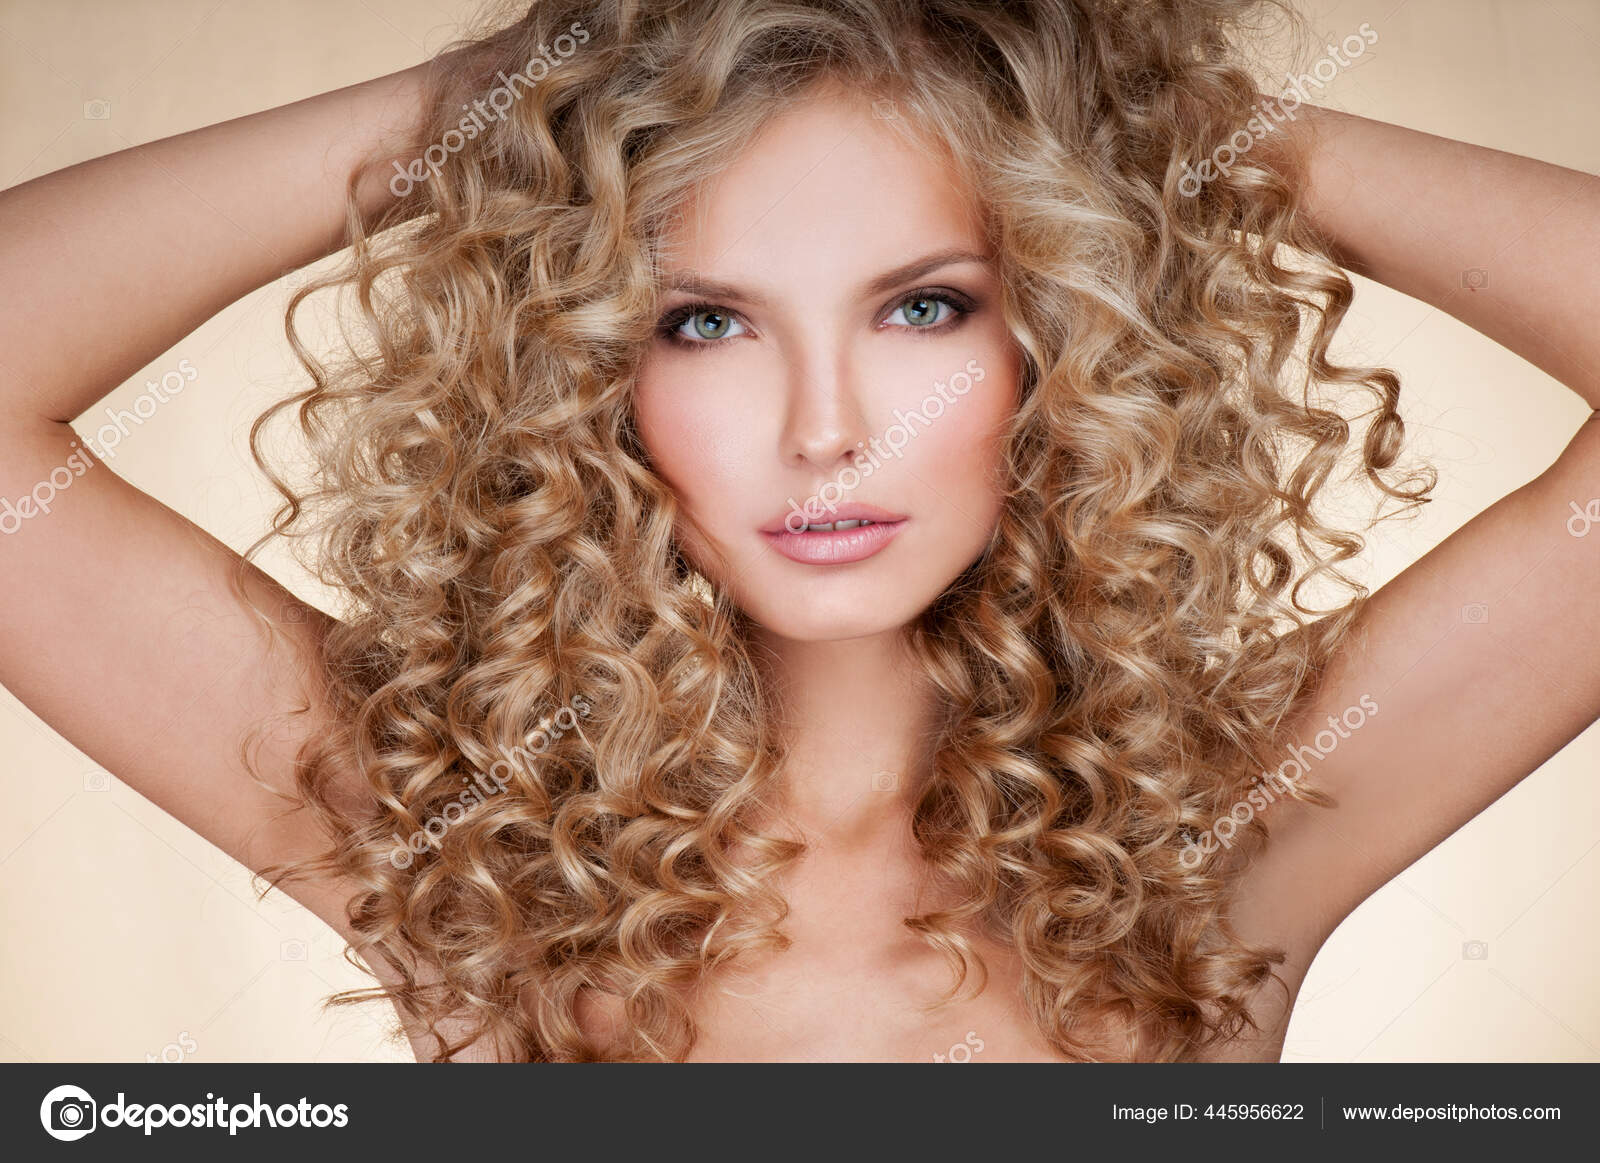 8. "The Best Haircuts for Ice Blond Curly Hair" - wide 2